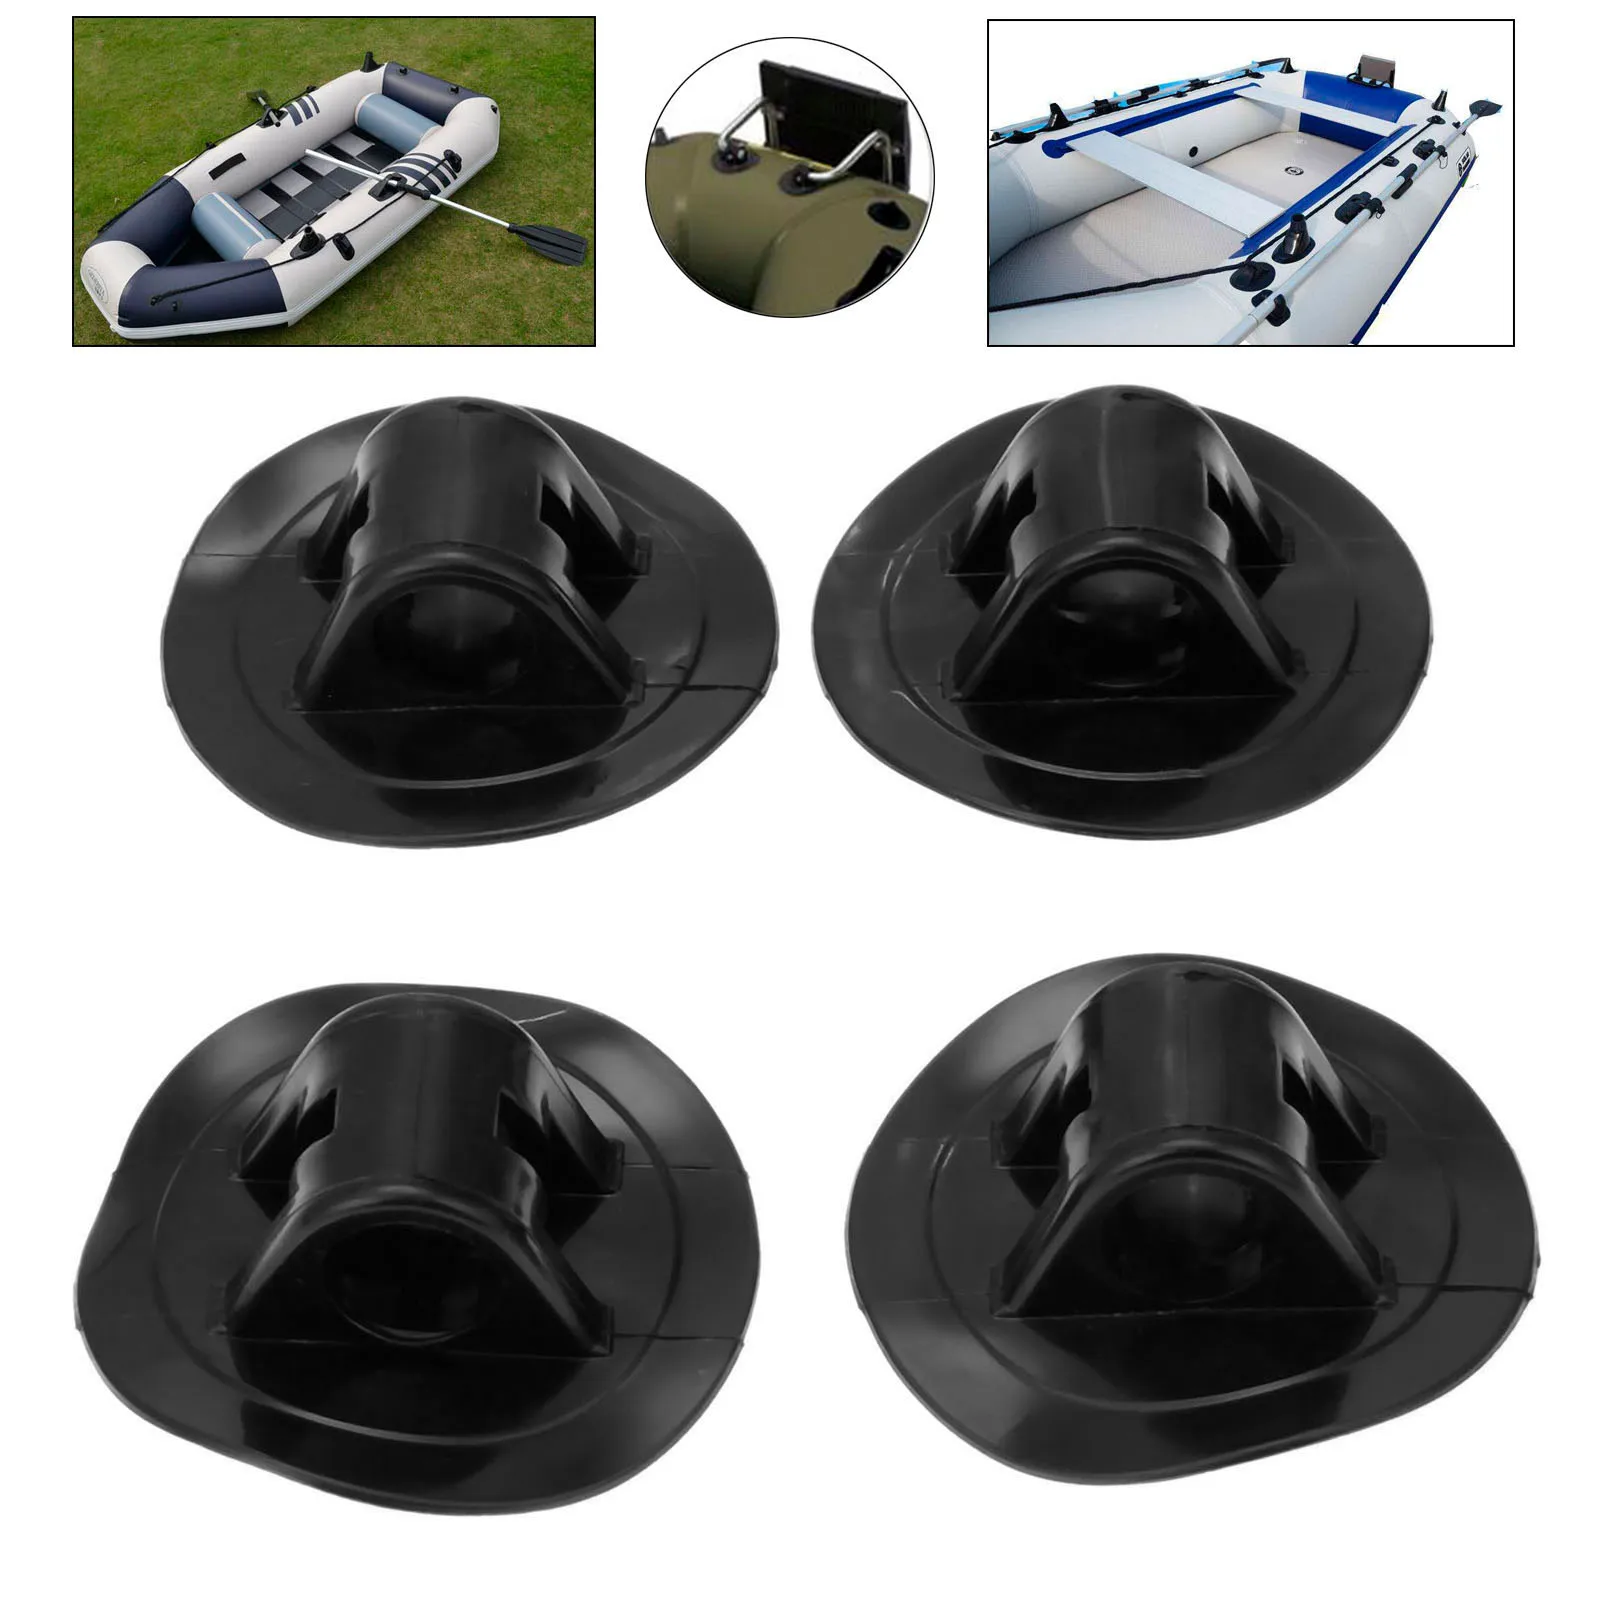 4 Pcs For 19.8mm Dia Inflatable Kayak Boat Engine Motor Mount Stand Holder Rack Grommet Fix Hook Rowing Boats Accessories Marine